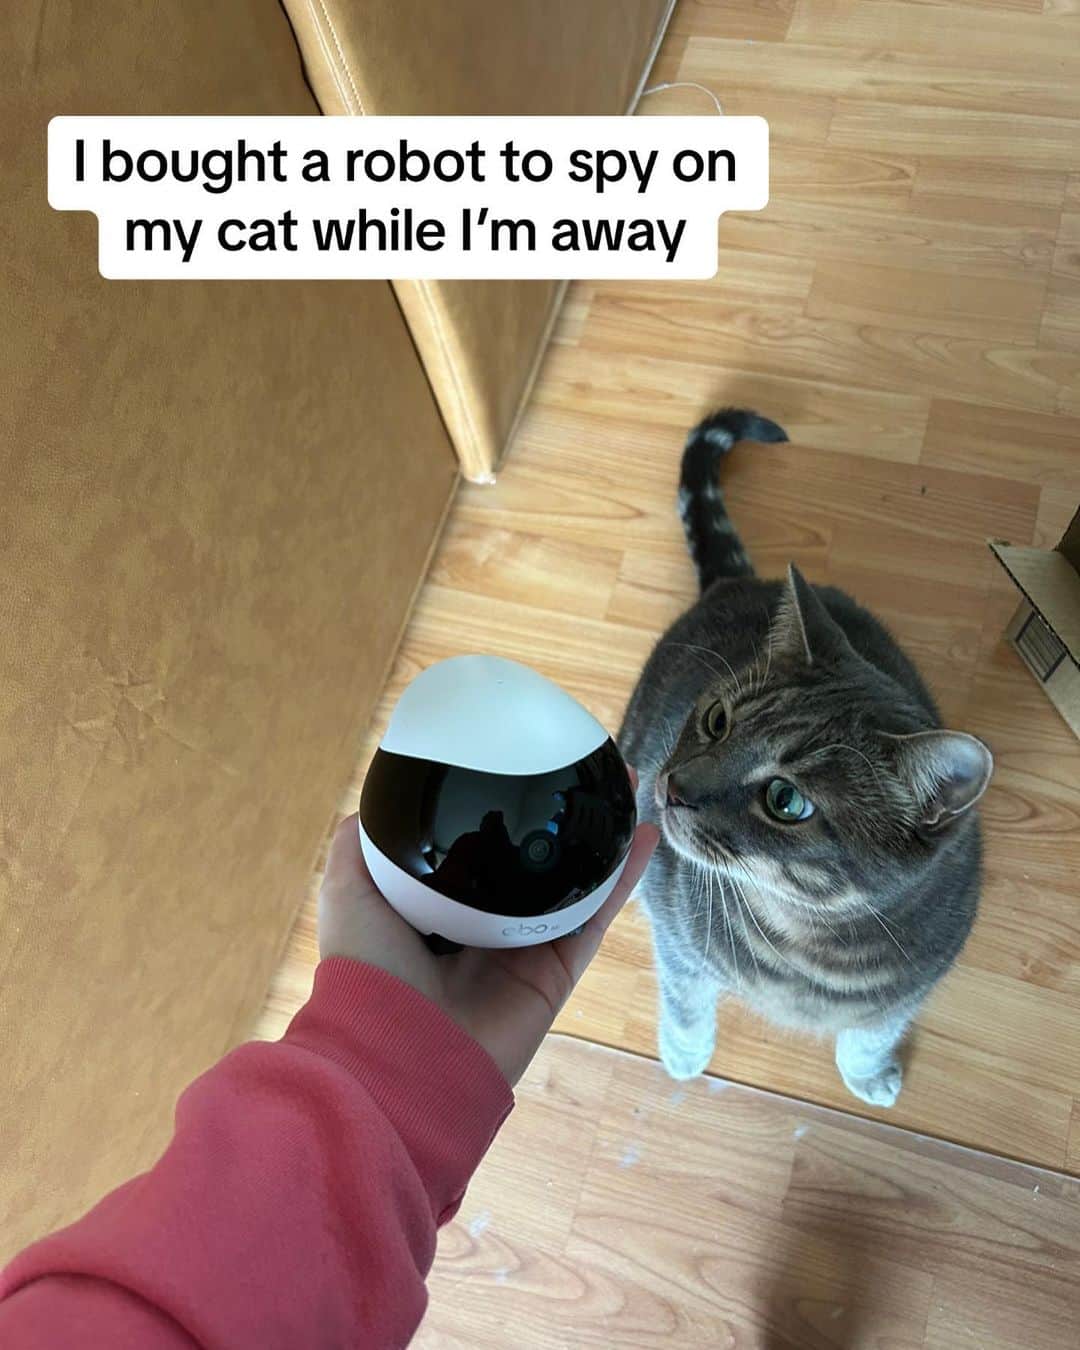 Cute Pets Dogs Catsさんのインスタグラム写真 - (Cute Pets Dogs CatsInstagram)「looks like he’s spying on the robot instead 🤨  Credit: beautiful kailiiiiiiii (tt) ** For all crediting issues and removals pls 𝐄𝐦𝐚𝐢𝐥 𝐮𝐬 ☺️  𝐍𝐨𝐭𝐞: we don’t own this video/pics, all rights go to their respective owners. If owner is not provided, tagged (meaning we couldn’t find who is the owner), 𝐩𝐥𝐬 𝐄𝐦𝐚𝐢𝐥 𝐮𝐬 with 𝐬𝐮𝐛𝐣𝐞𝐜𝐭 “𝐂𝐫𝐞𝐝𝐢𝐭 𝐈𝐬𝐬𝐮𝐞𝐬” and 𝐨𝐰𝐧𝐞𝐫 𝐰𝐢𝐥𝐥 𝐛𝐞 𝐭𝐚𝐠𝐠𝐞𝐝 𝐬𝐡𝐨𝐫𝐭𝐥𝐲 𝐚𝐟𝐭𝐞𝐫.  We have been building this community for over 6 years, but 𝐞𝐯𝐞𝐫𝐲 𝐫𝐞𝐩𝐨𝐫𝐭 𝐜𝐨𝐮𝐥𝐝 𝐠𝐞𝐭 𝐨𝐮𝐫 𝐩𝐚𝐠𝐞 𝐝𝐞𝐥𝐞𝐭𝐞𝐝, pls email us first. **」7月7日 23時59分 - dailycatclub